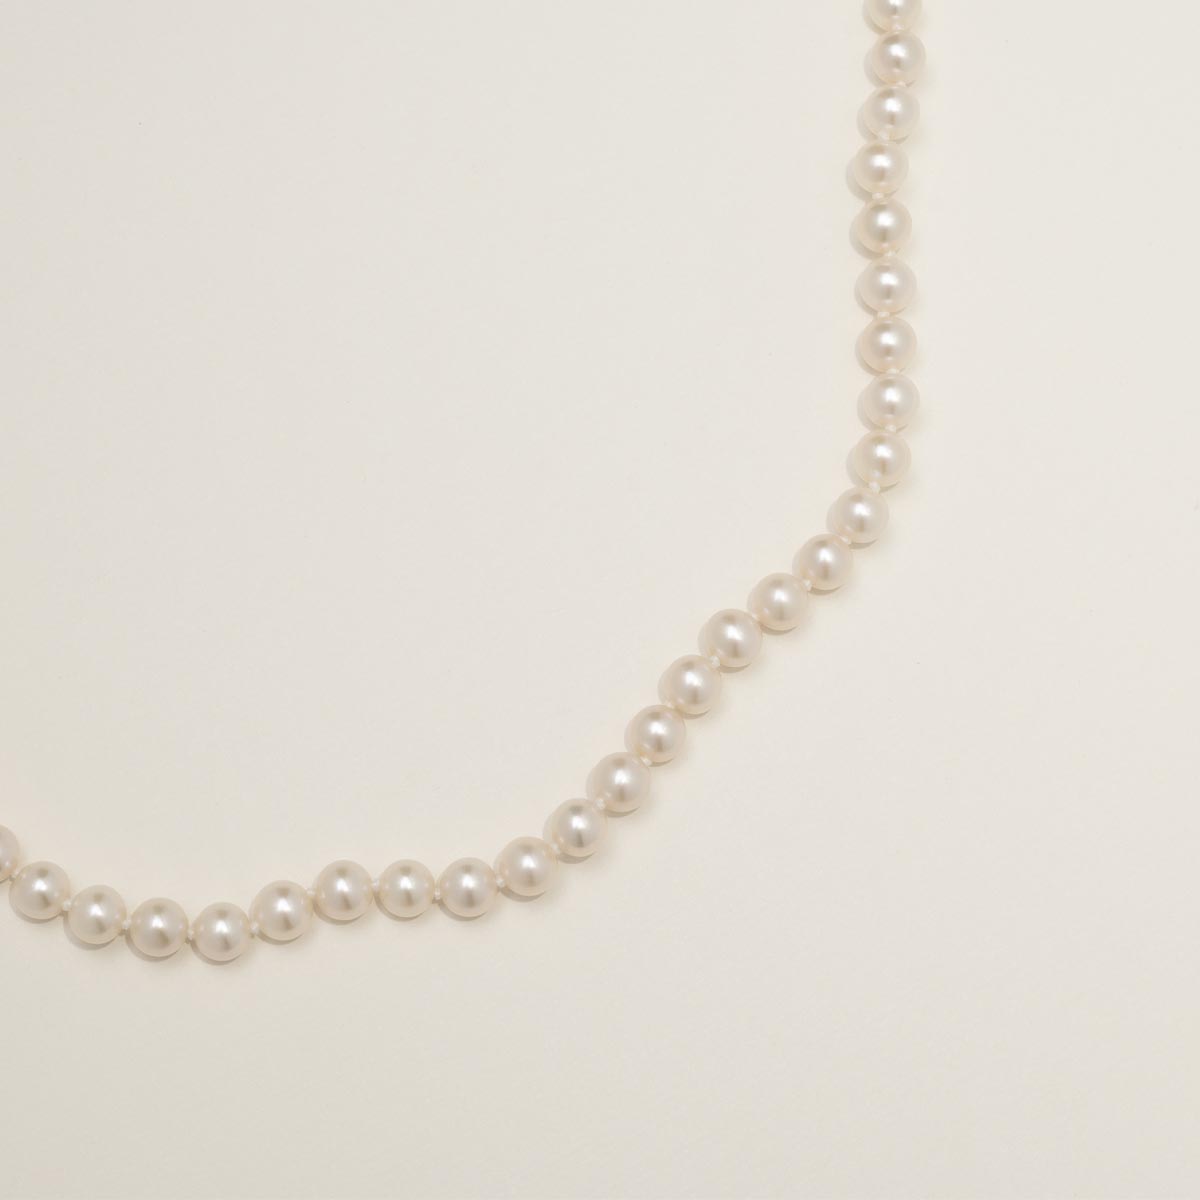 Mastoloni Cultured Freshwater Pearl Strand Necklace in 14kt Yellow Gold (6-6.5mm pearls)